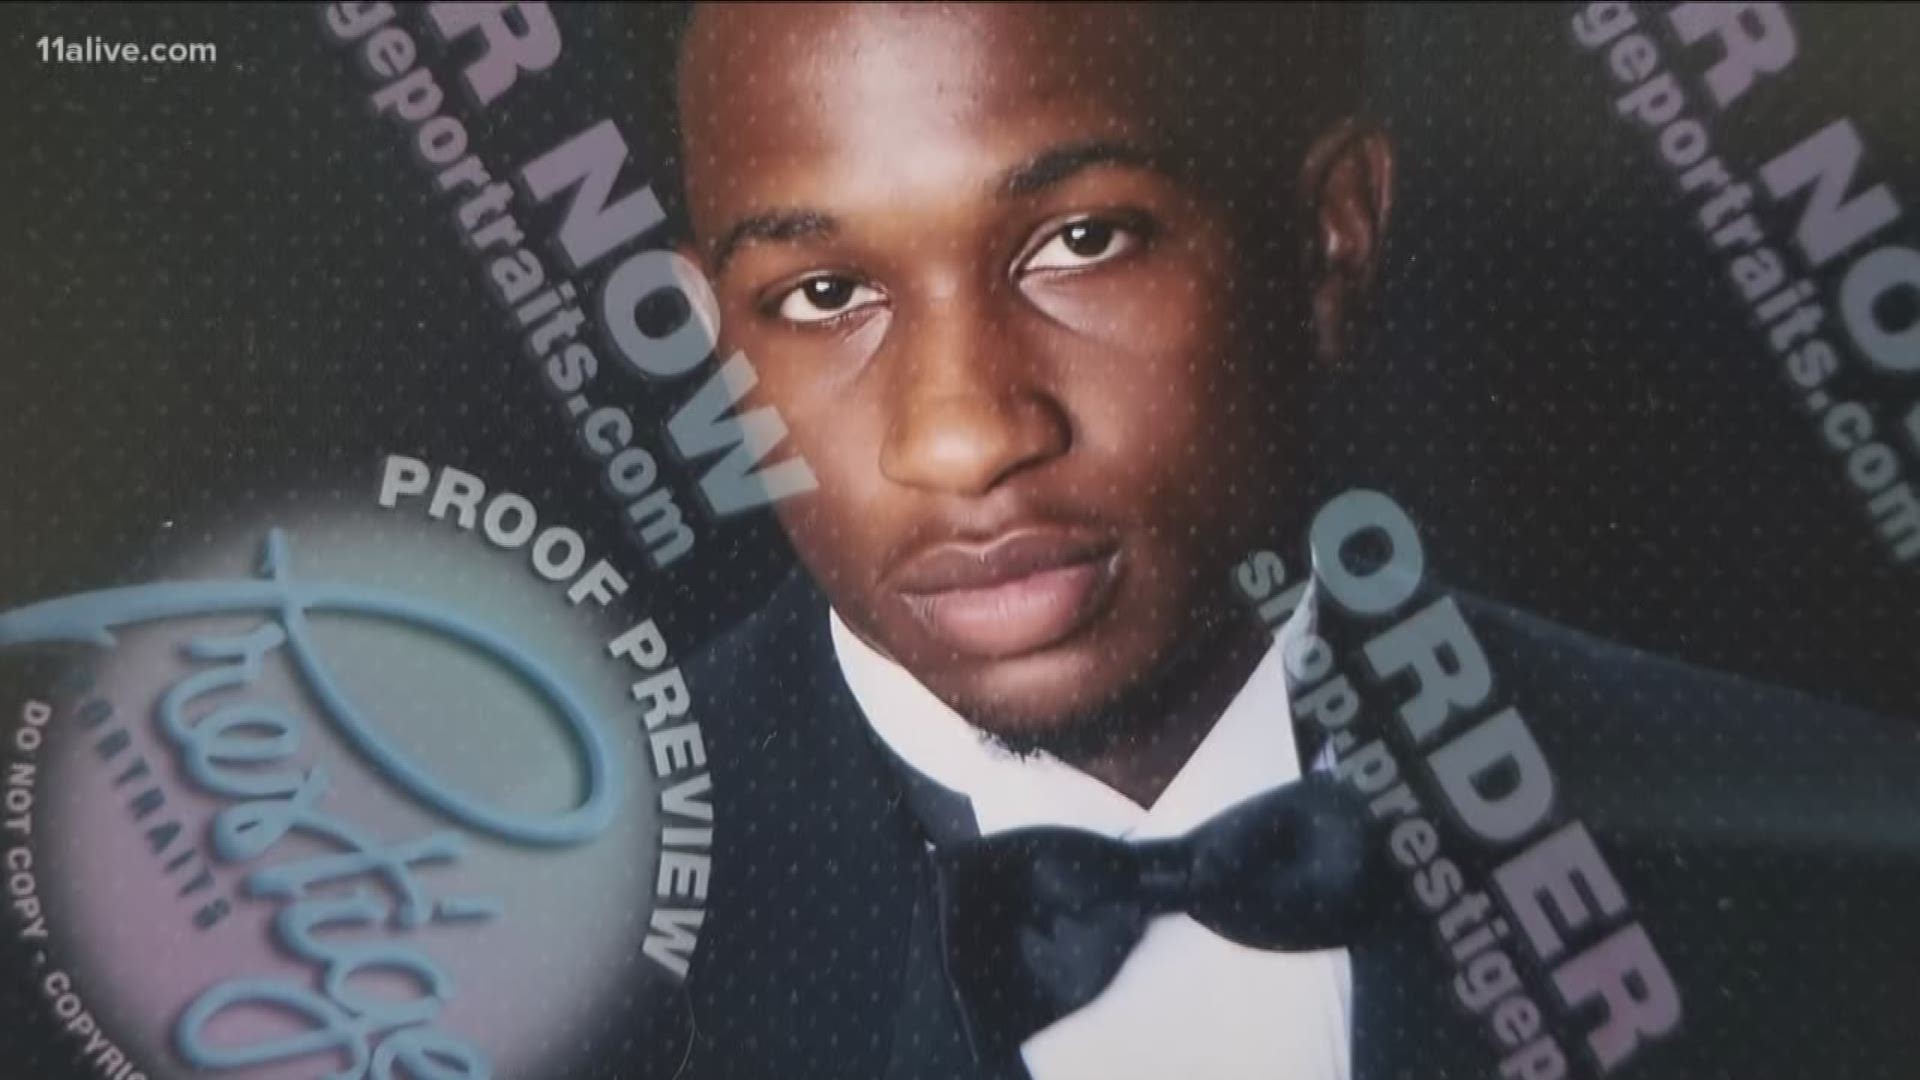 The family attorney has identified a man who was killed in an officer-involved shooting in Atlanta, Tuesday night. The Georgia Bureau of Investigation was called in late Tuesday after an officer fired his weapon and killed the suspect, 18-year-old D'ettrick Griffin.